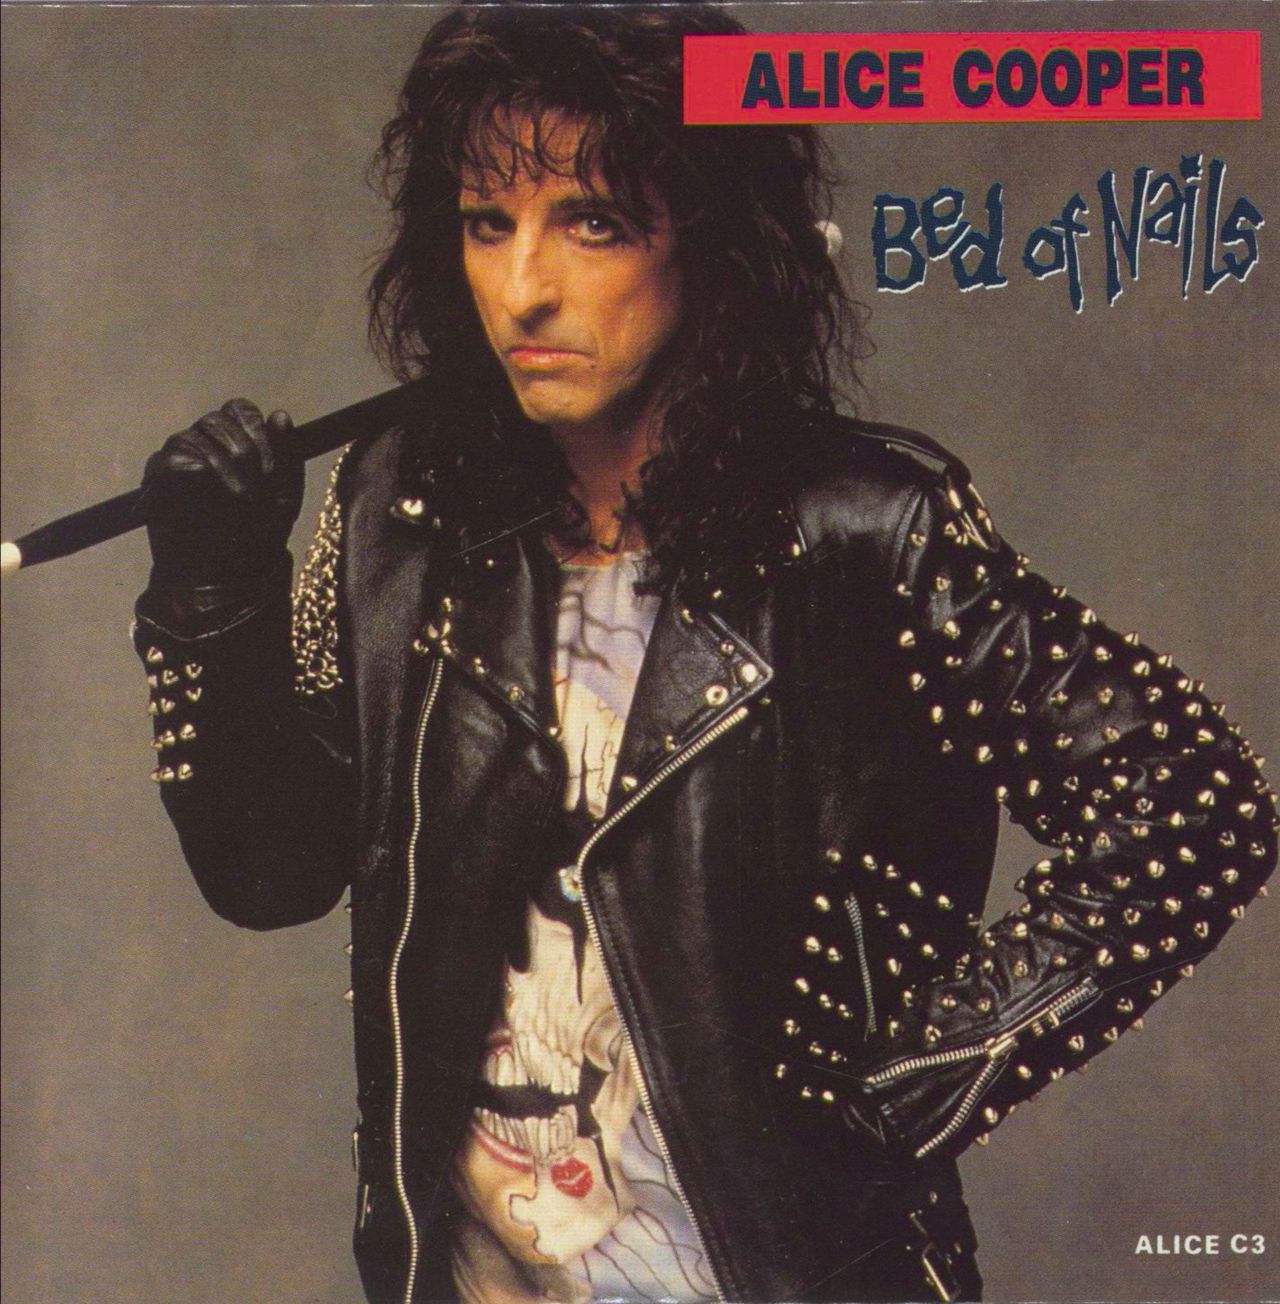 Alice Cooper - Bed of Nails (from Alice Cooper: Trashes The World) on Make  a GIF